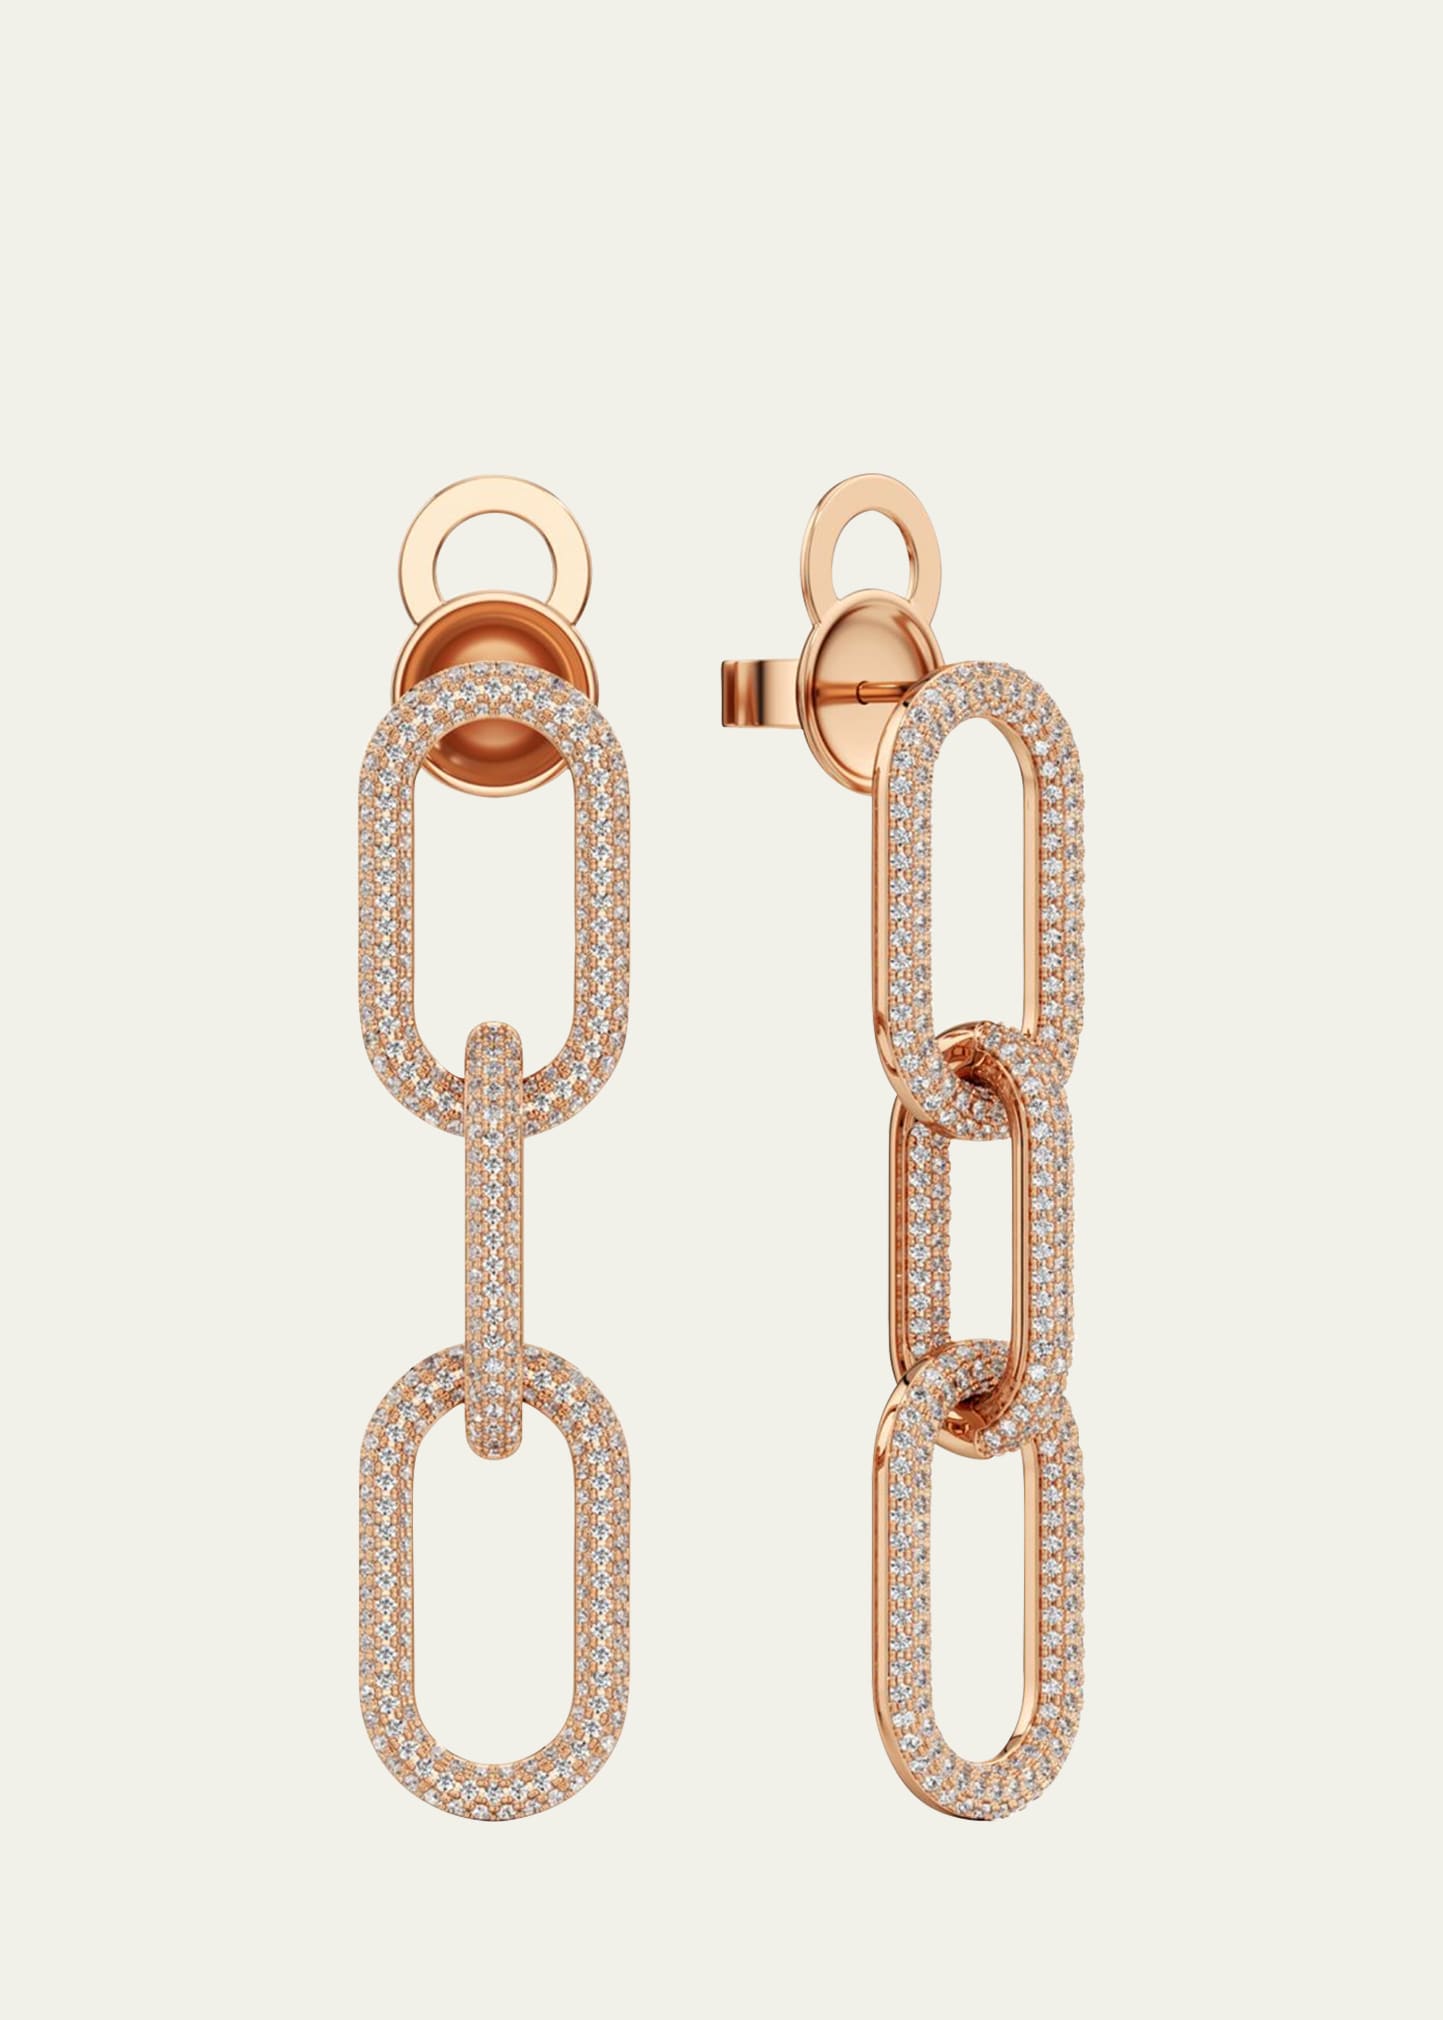 Connect Collection Three-Link Pave Diamond Earrings in 18K Rose Gold